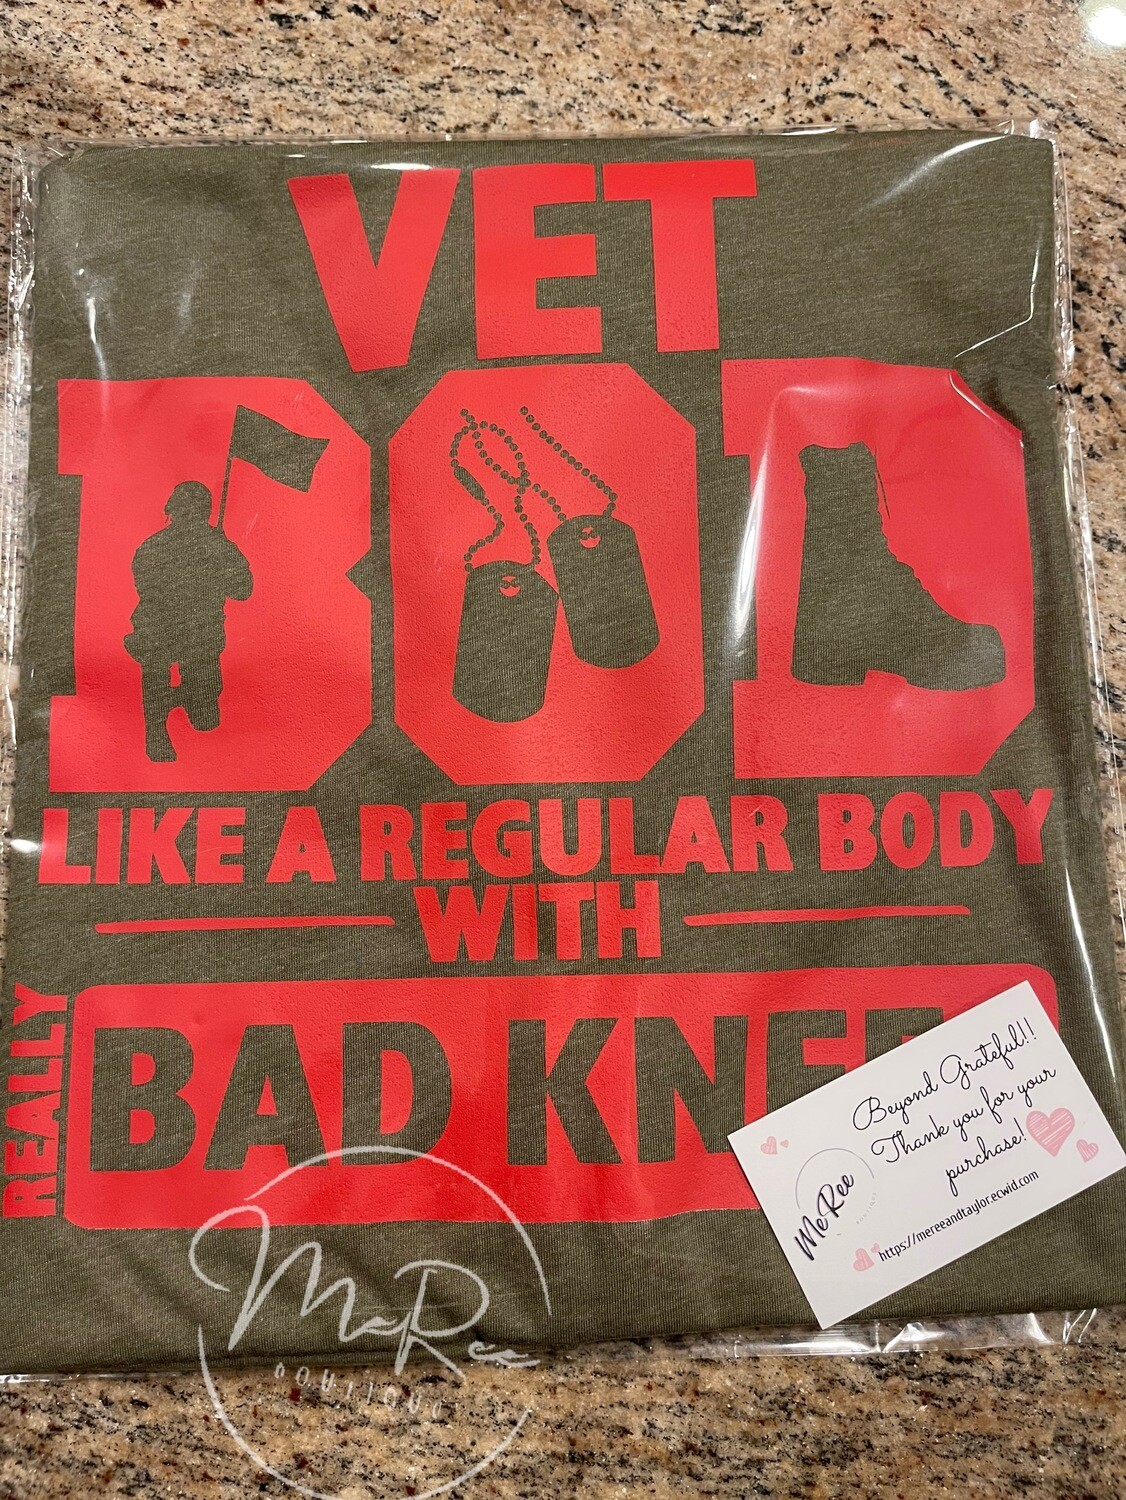 Vet BOD T-Shirt (please allow 3-5 days to process, once ordered.)